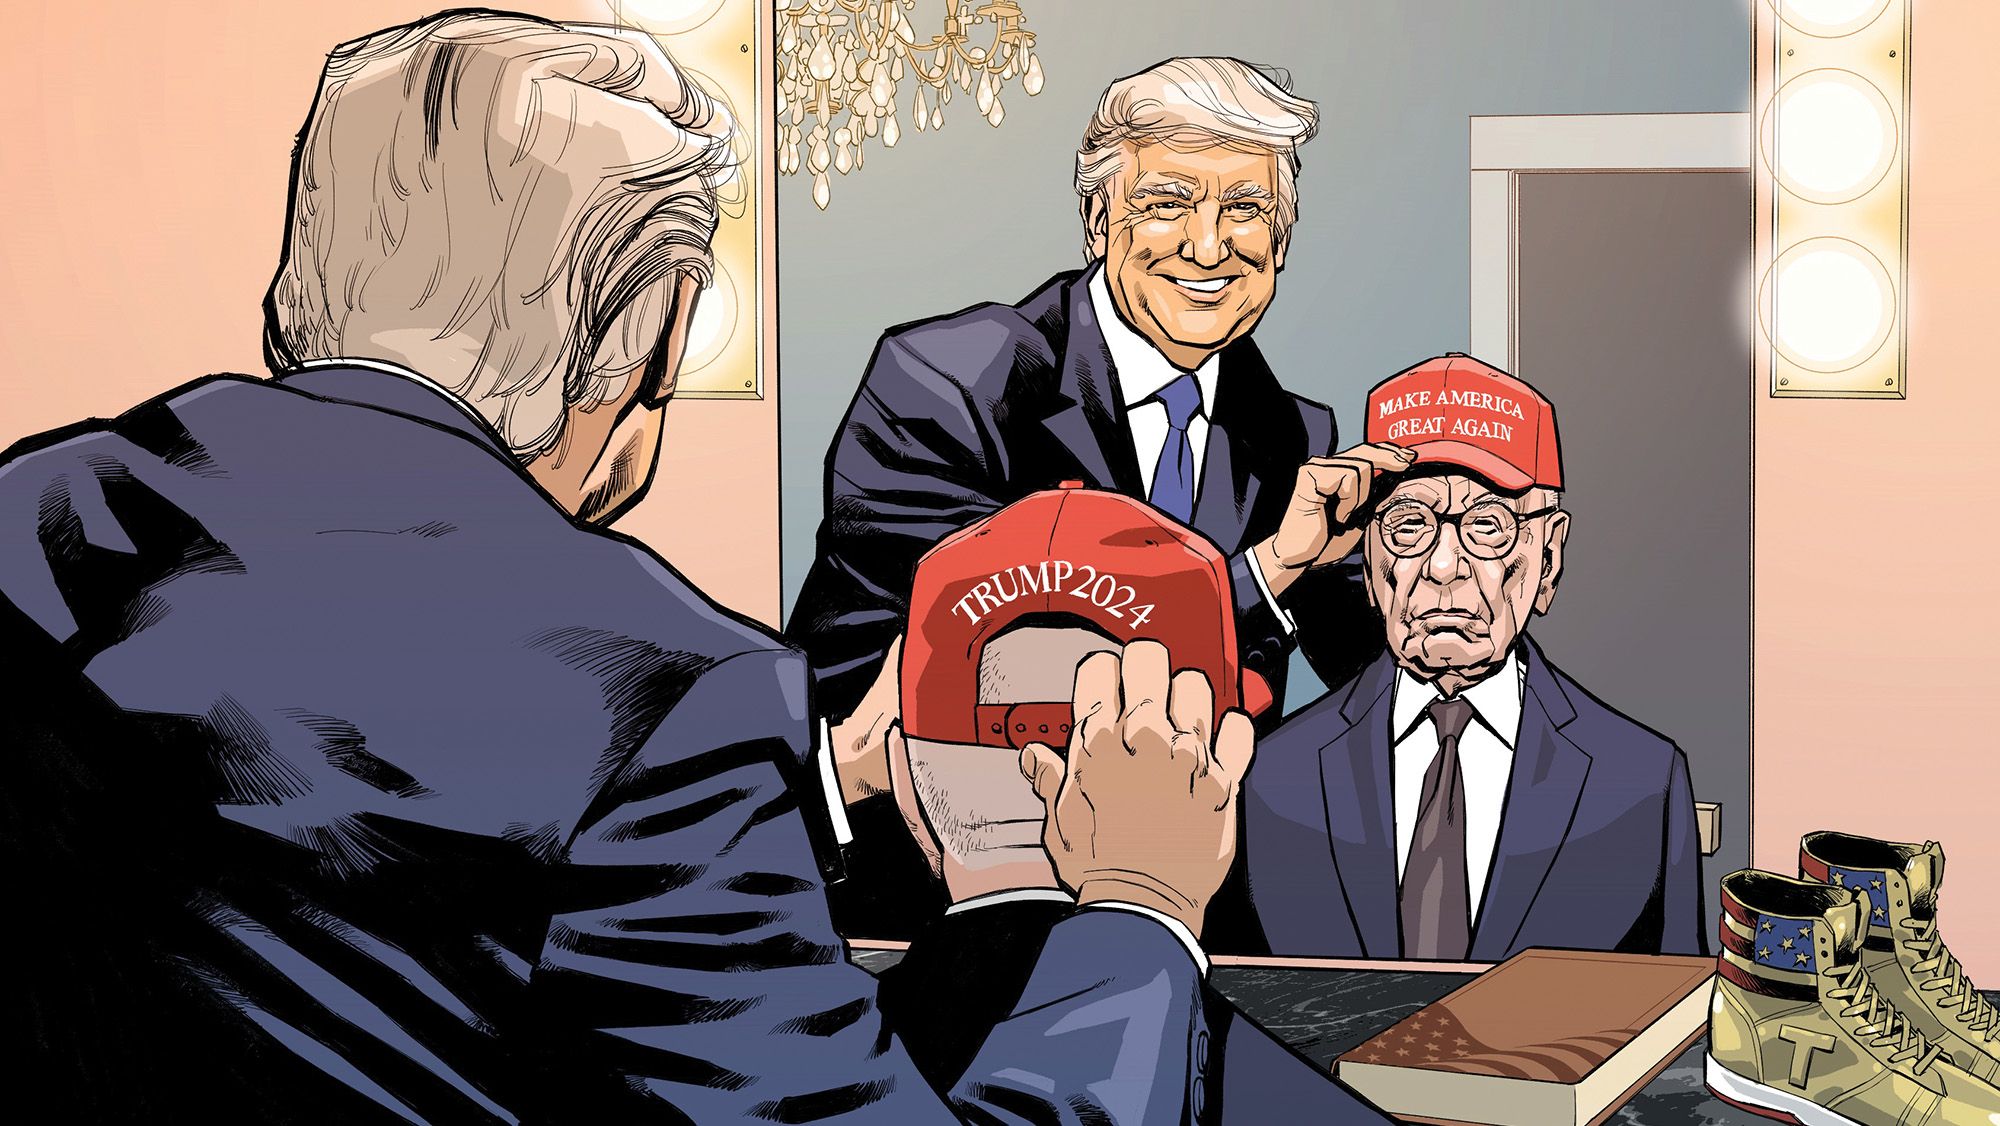 Donald Trump and Rupert Murdoch looking in a mirror as Trump places a red MAKE AMERICA GREAT AGAIN hat on Murdoch's head